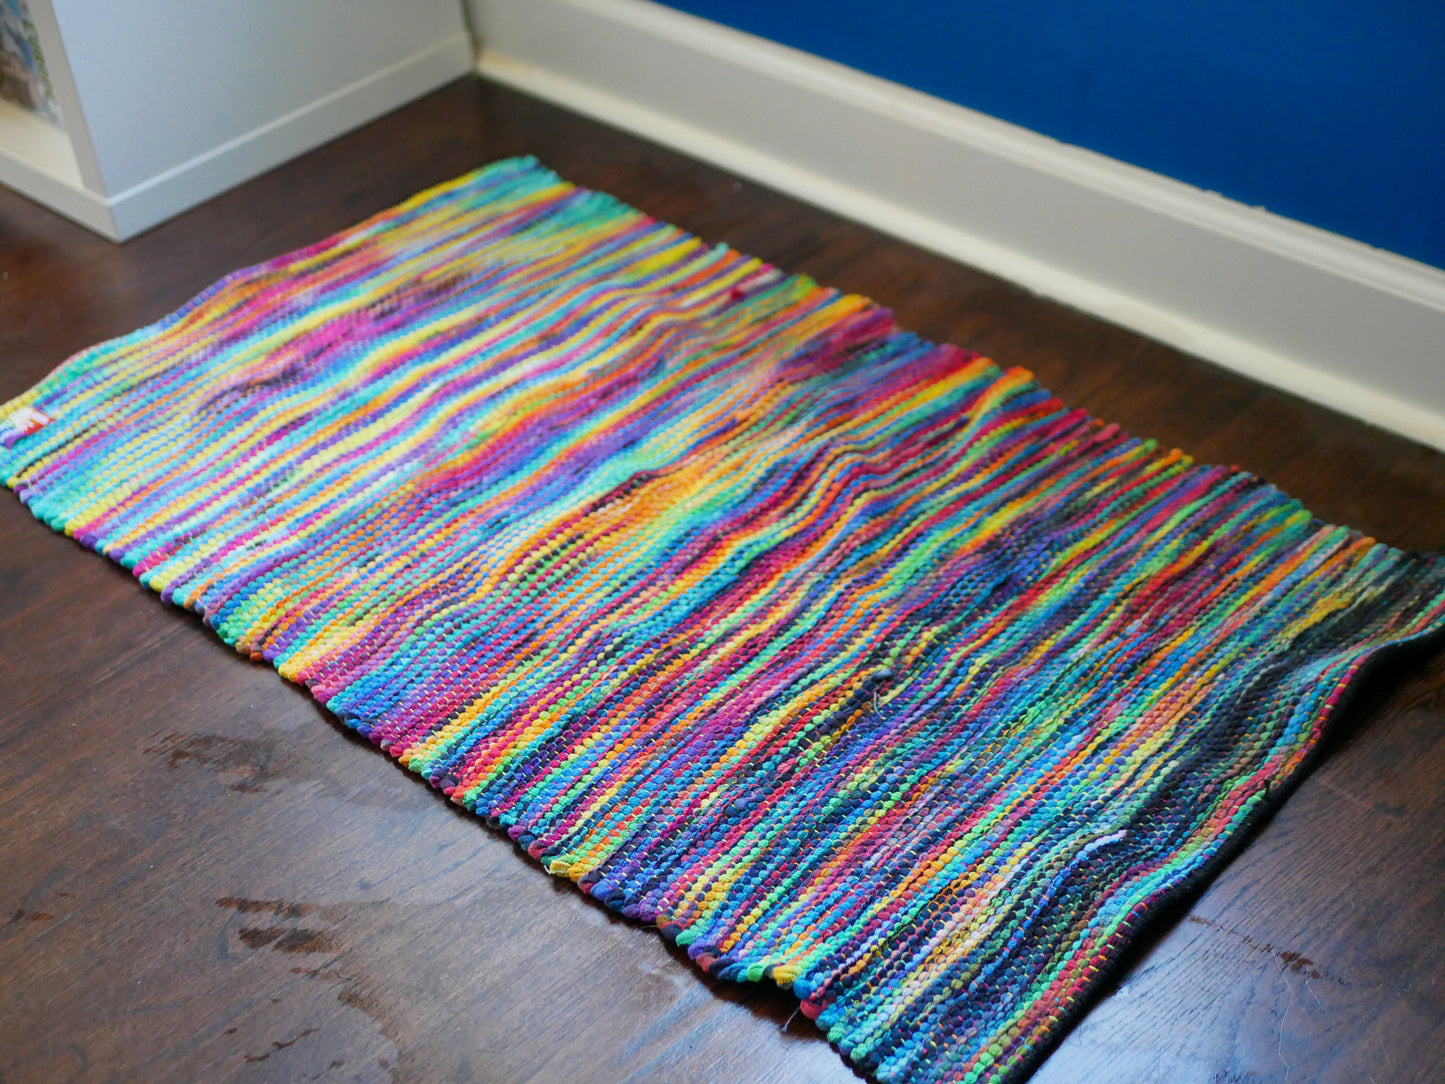 Rag rug - 23 inches x 36 inches